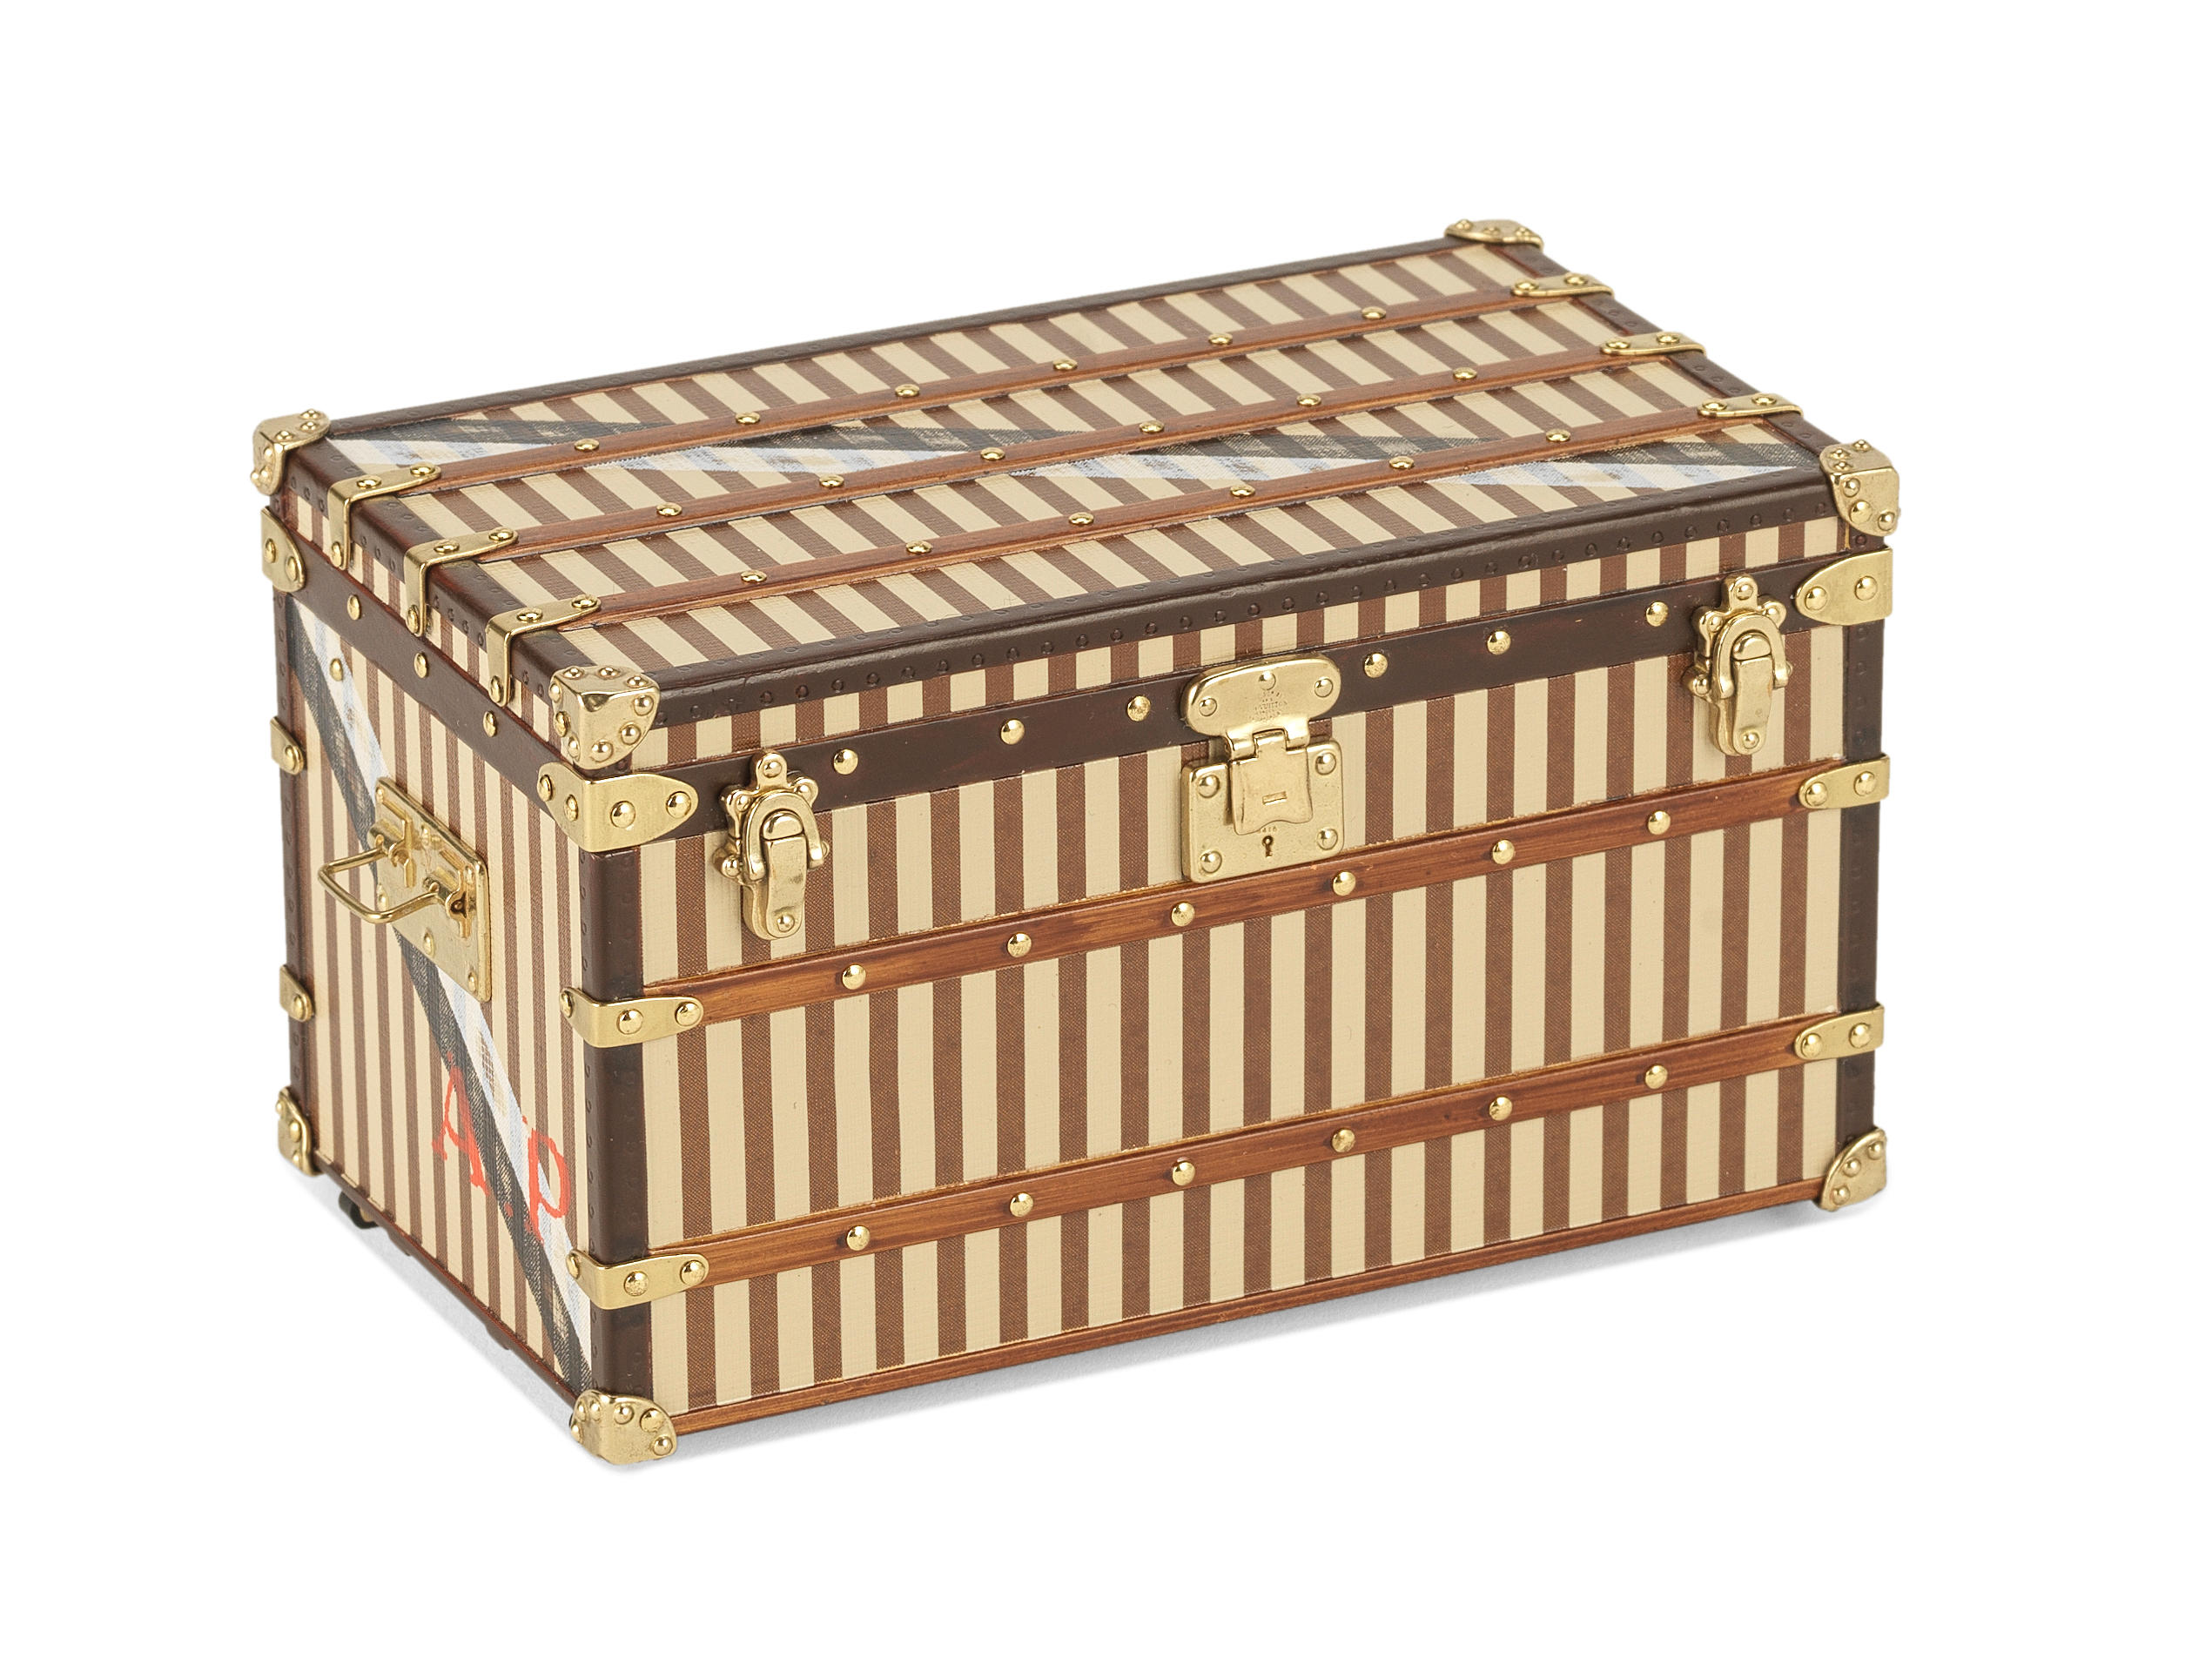 A COURRIER 1888 TRUNK PAPERWEIGHT  Louis Vuitton, 2000 (includes dust bag and box)